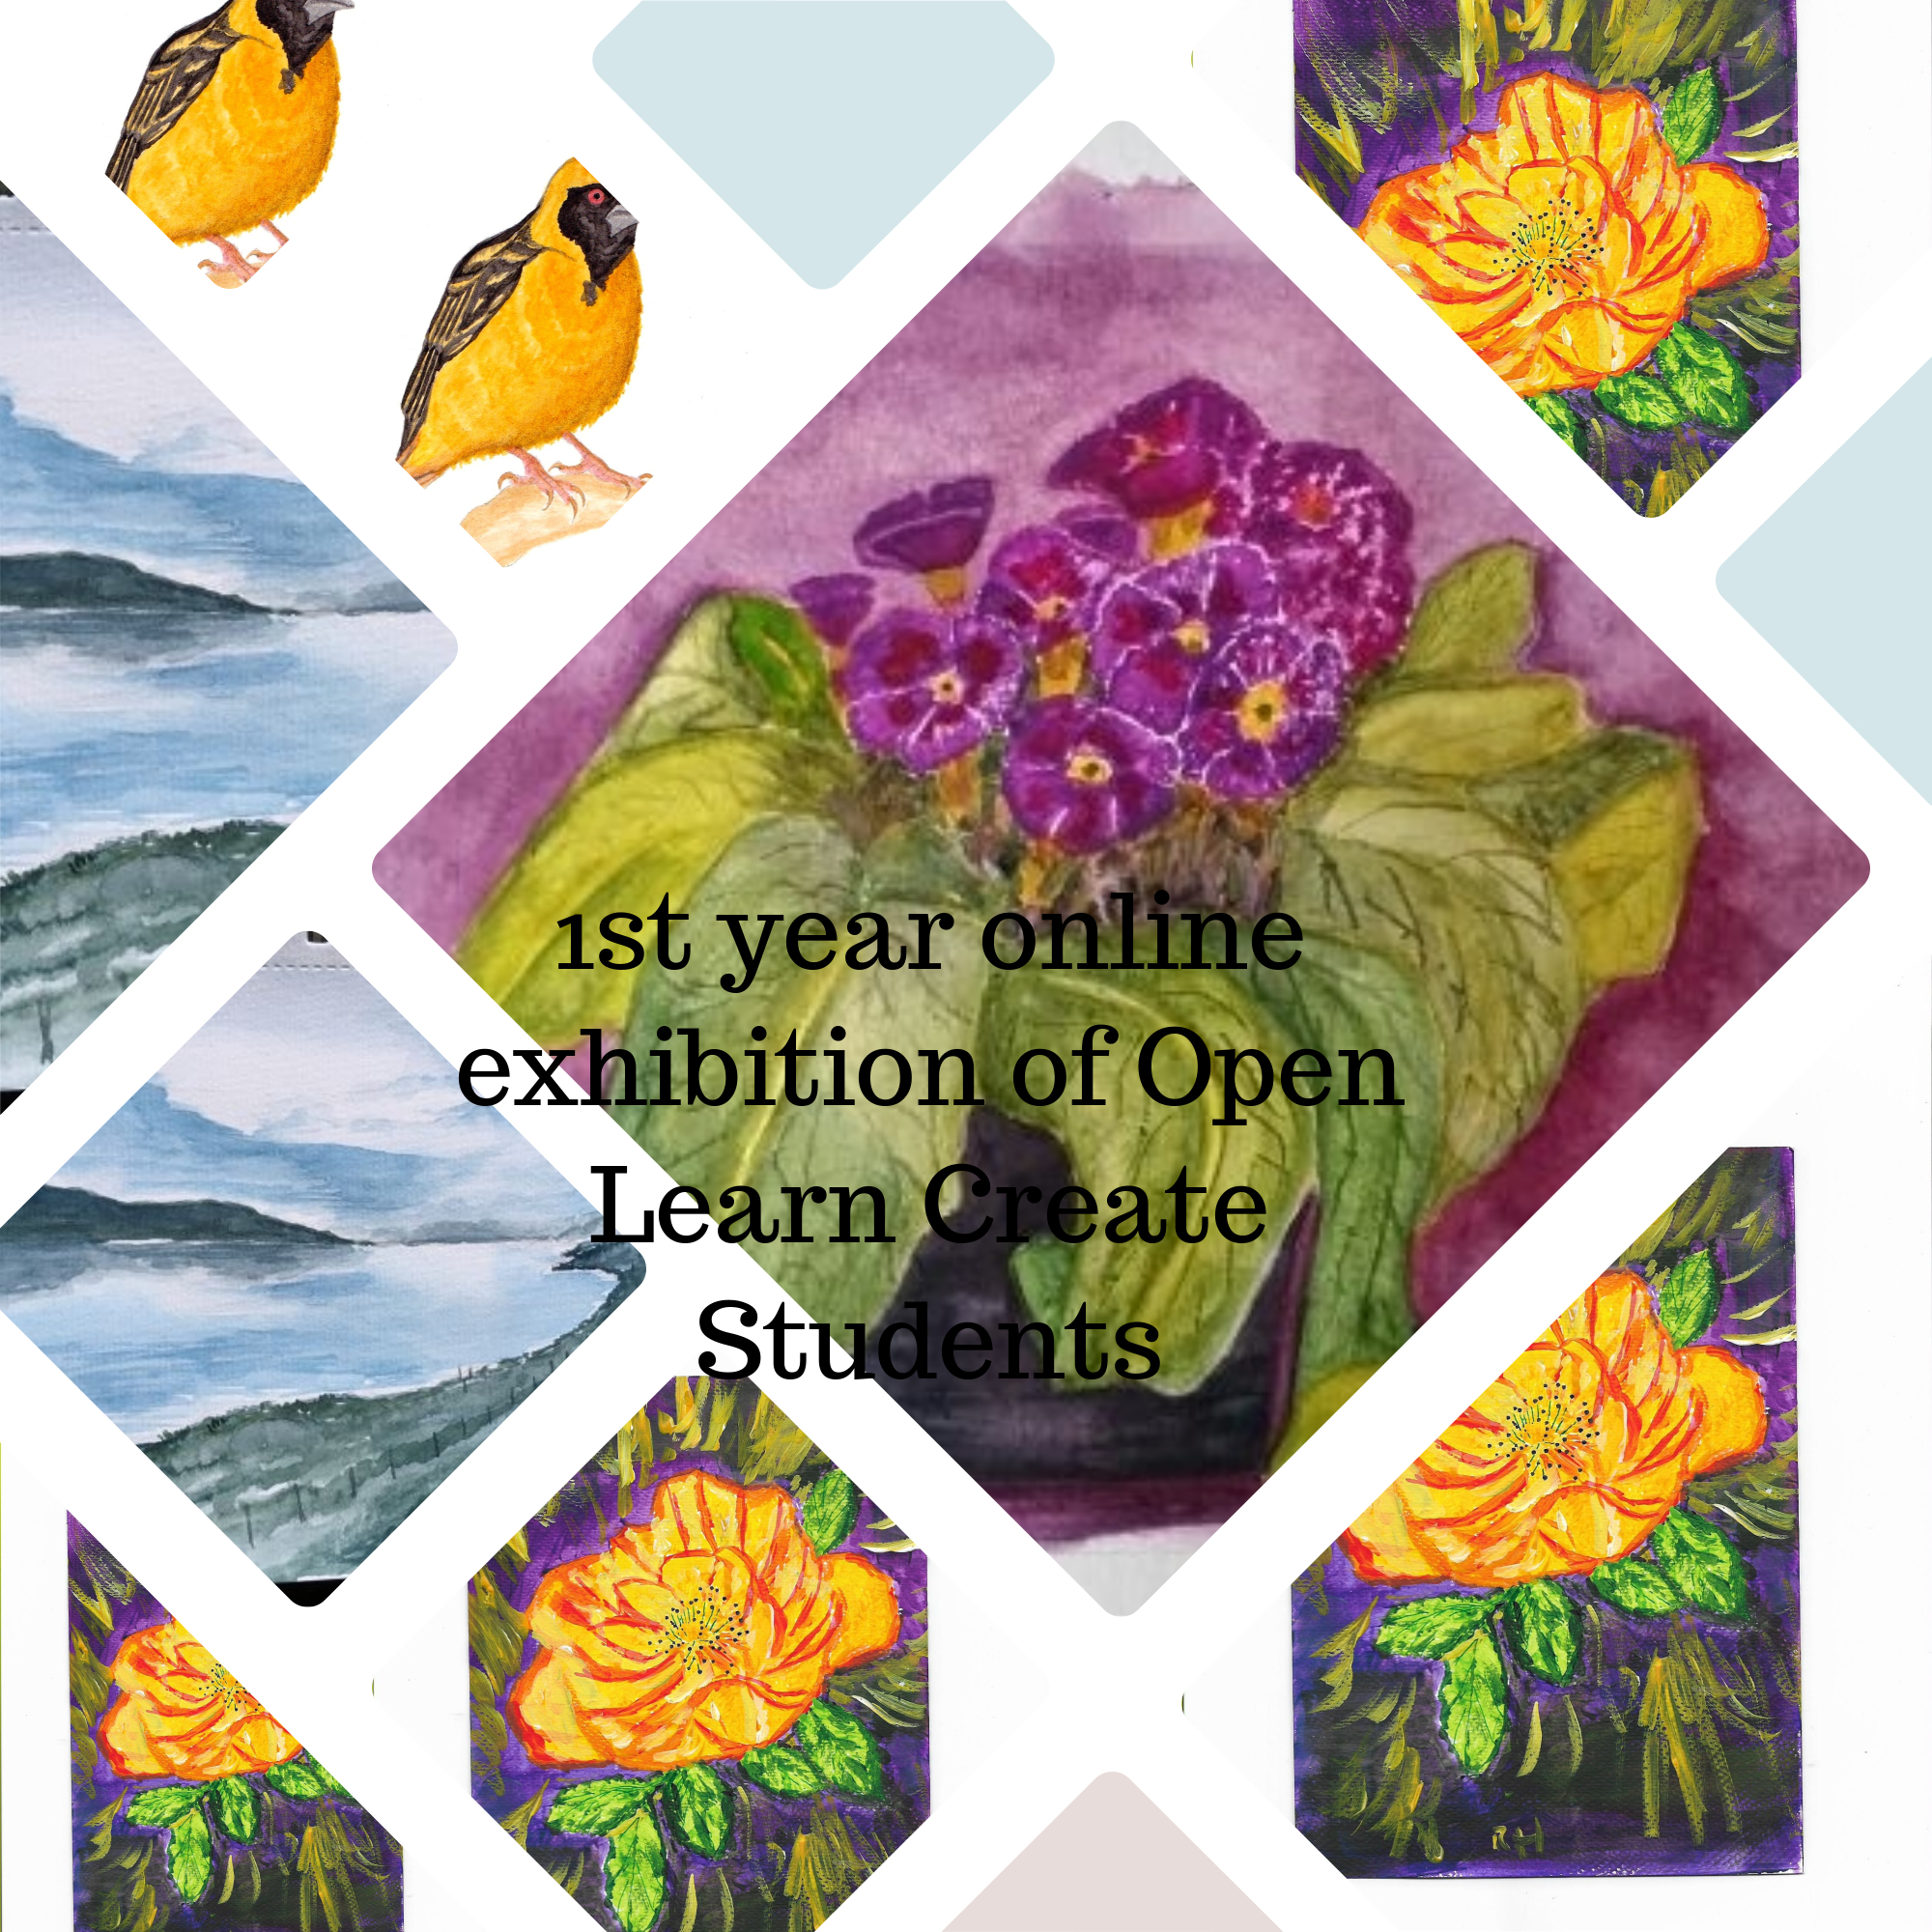 1st Online Exhibition of the art students in Open Learn Create